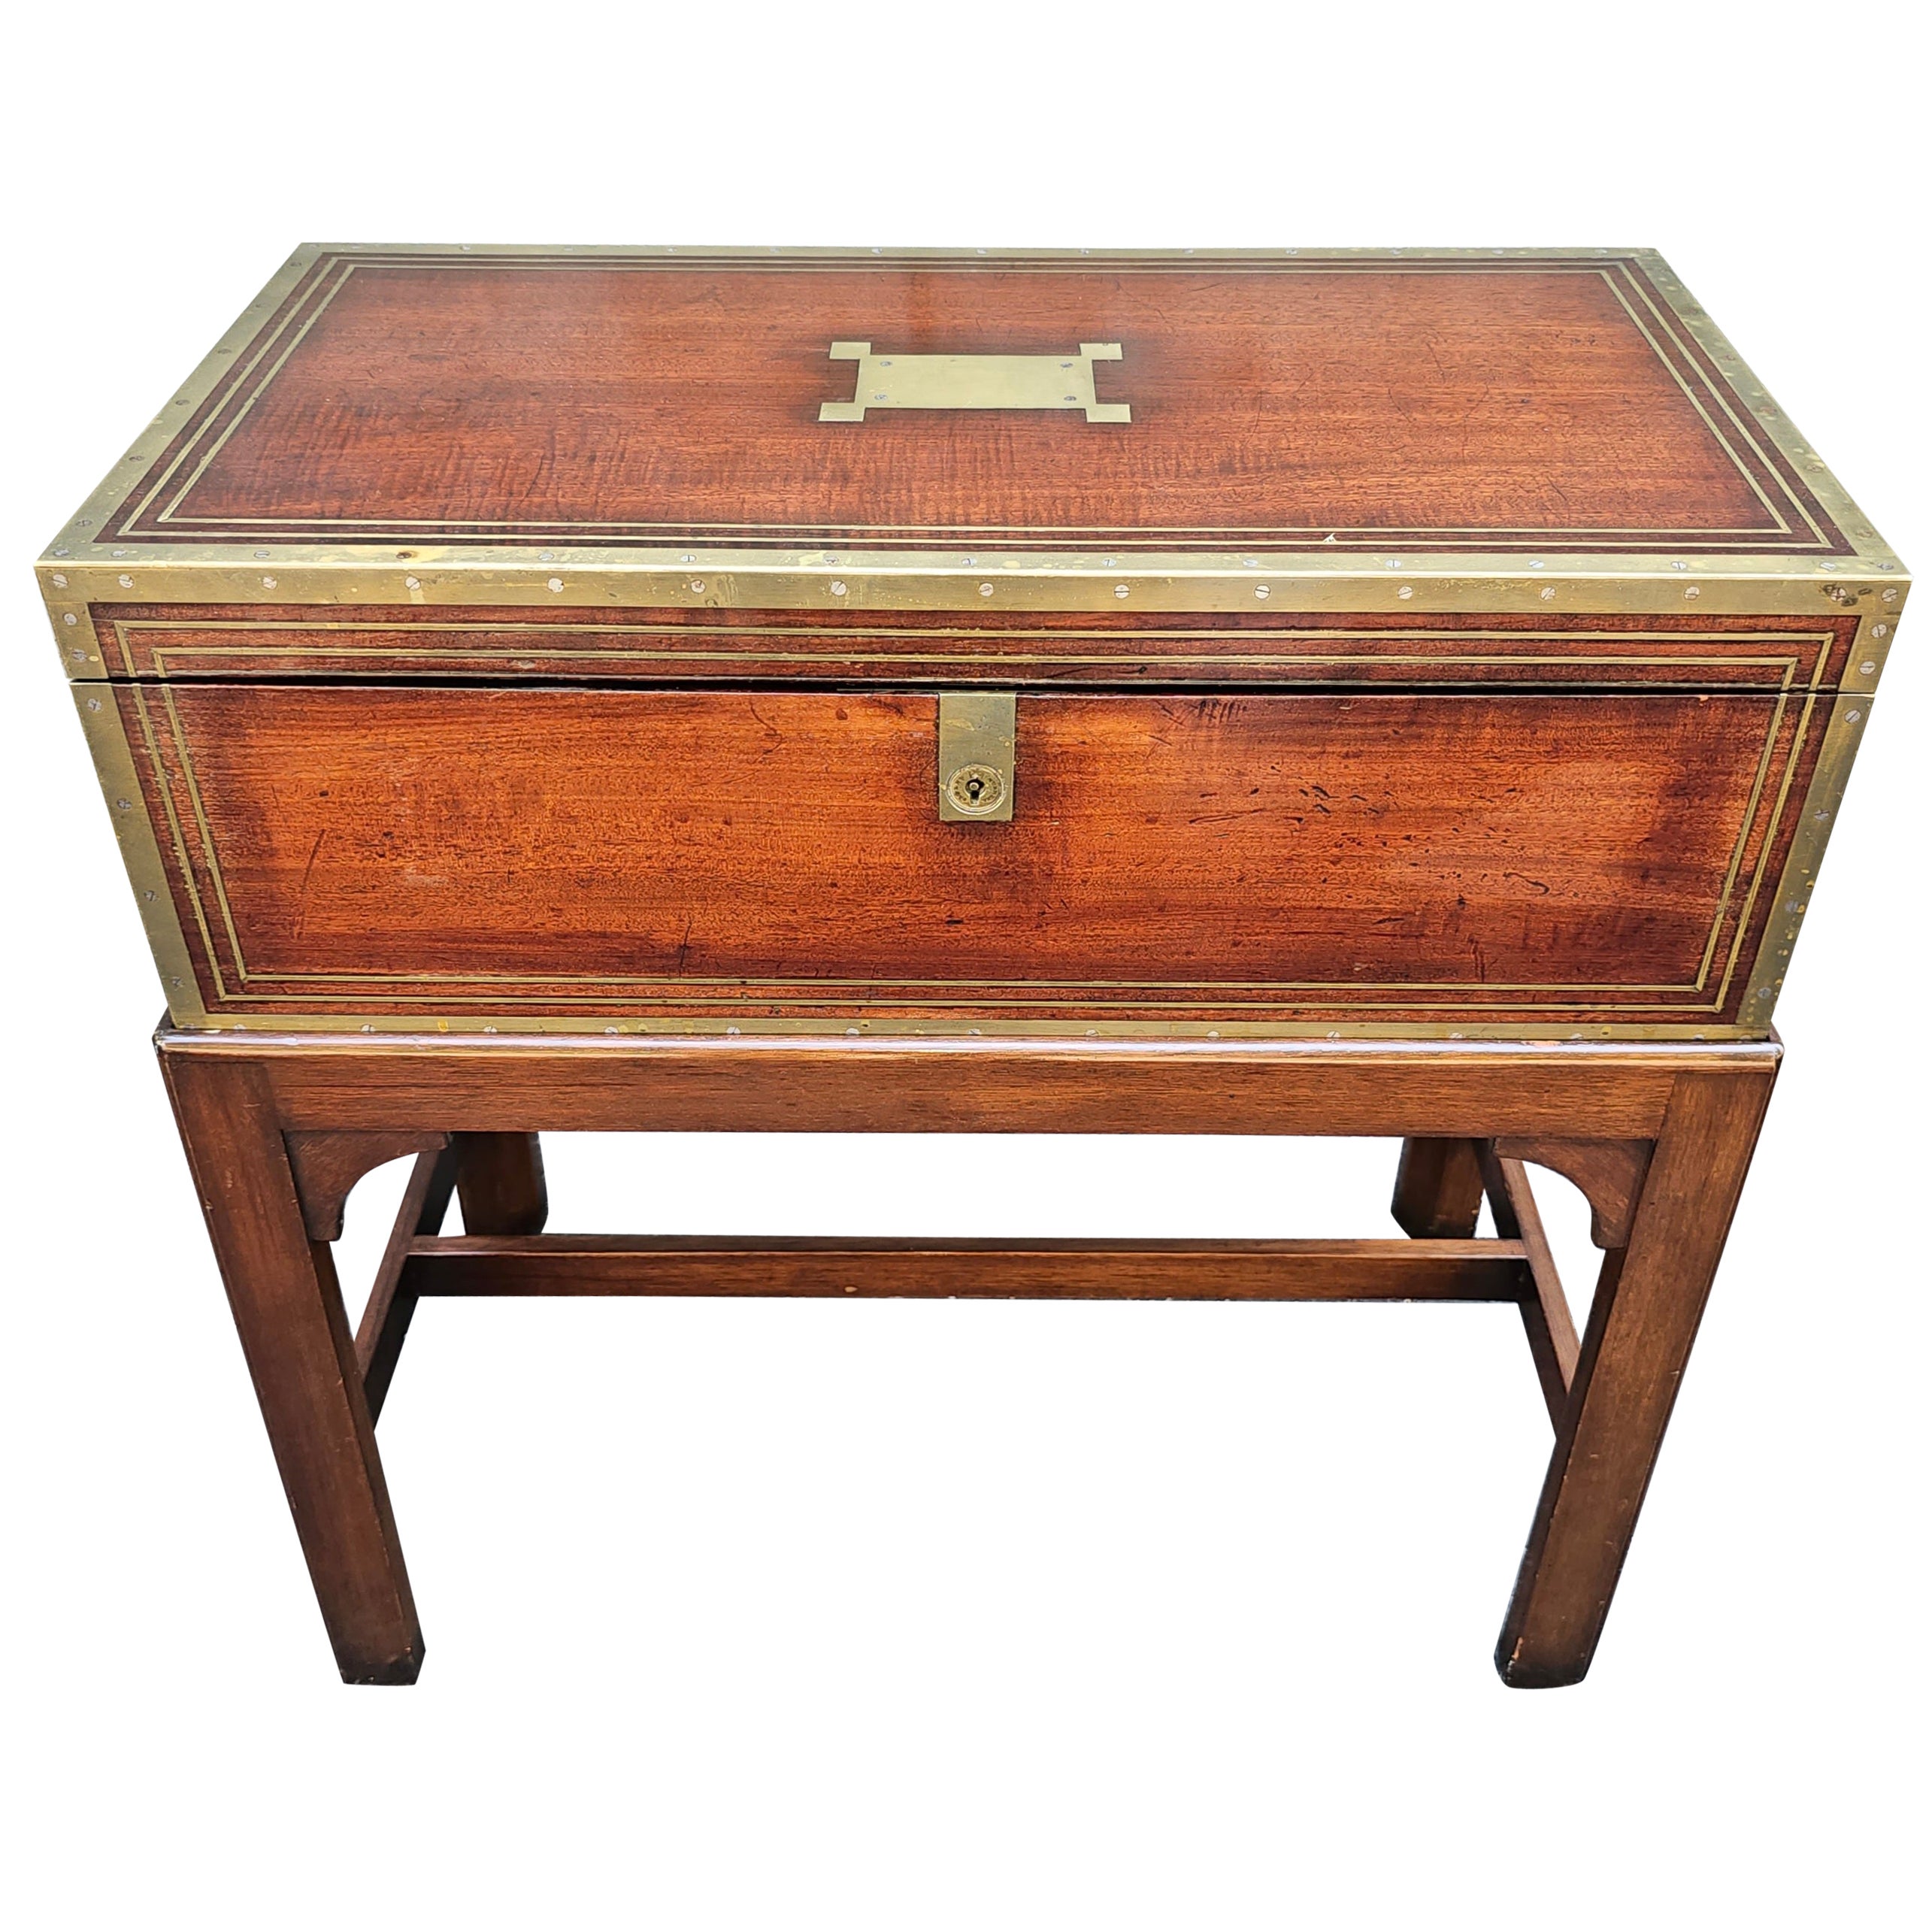 19th Century Mahogany and Brass Inlays Travel Desk on Stand For Sale